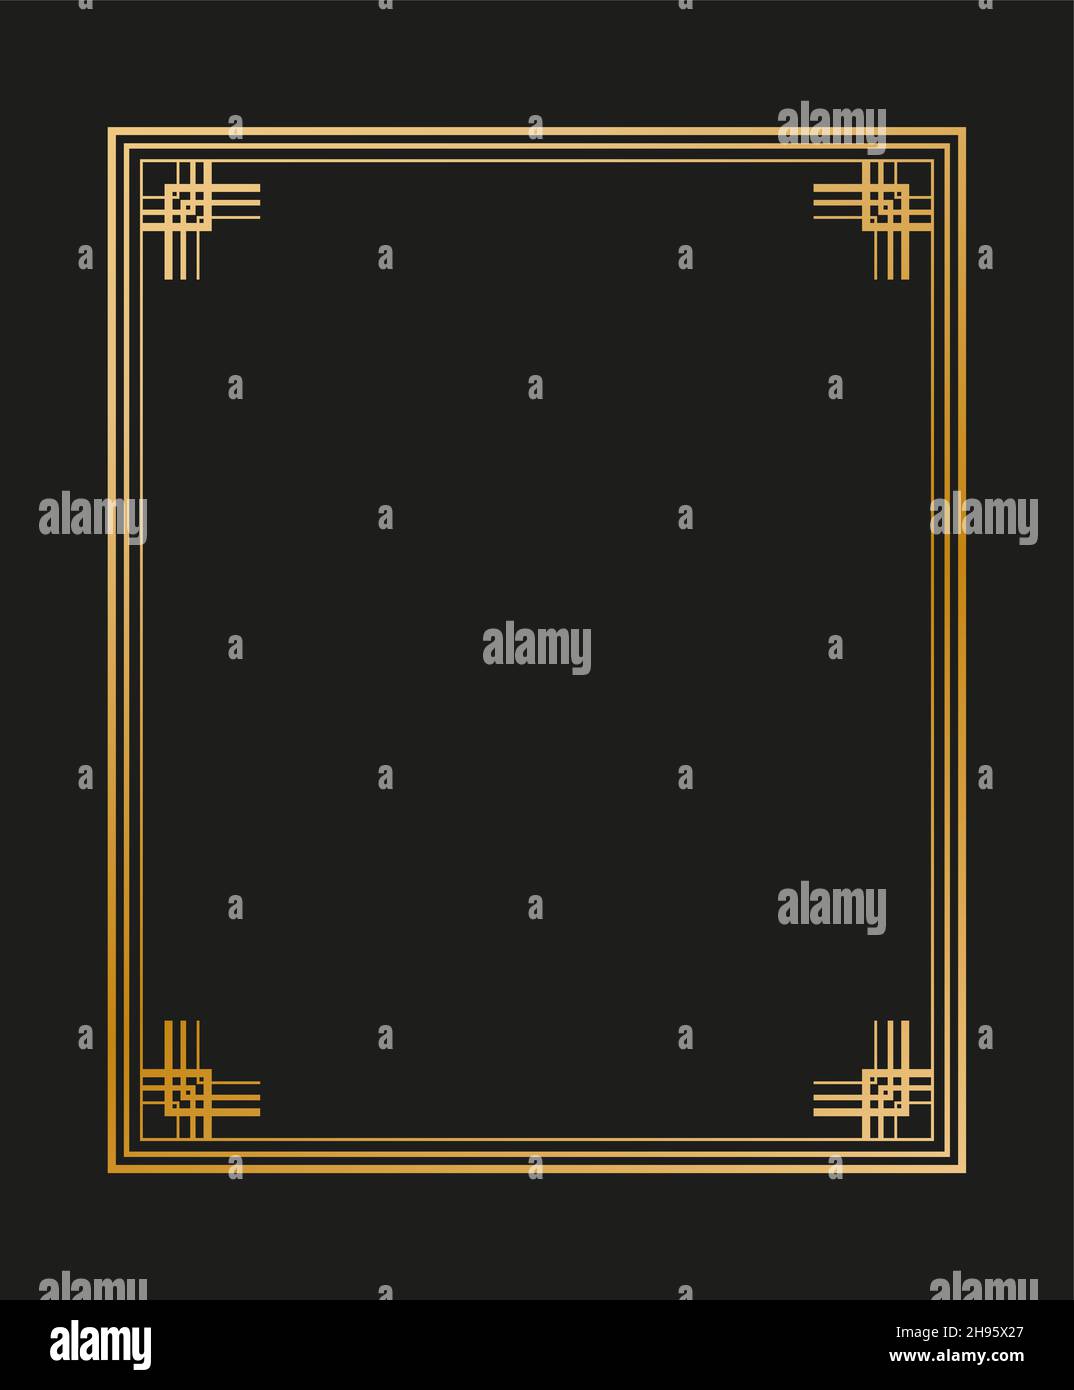 Vector illustration of art deco borders and frames. Creative pattern in the style of the 1920s for your design. Stock Vector